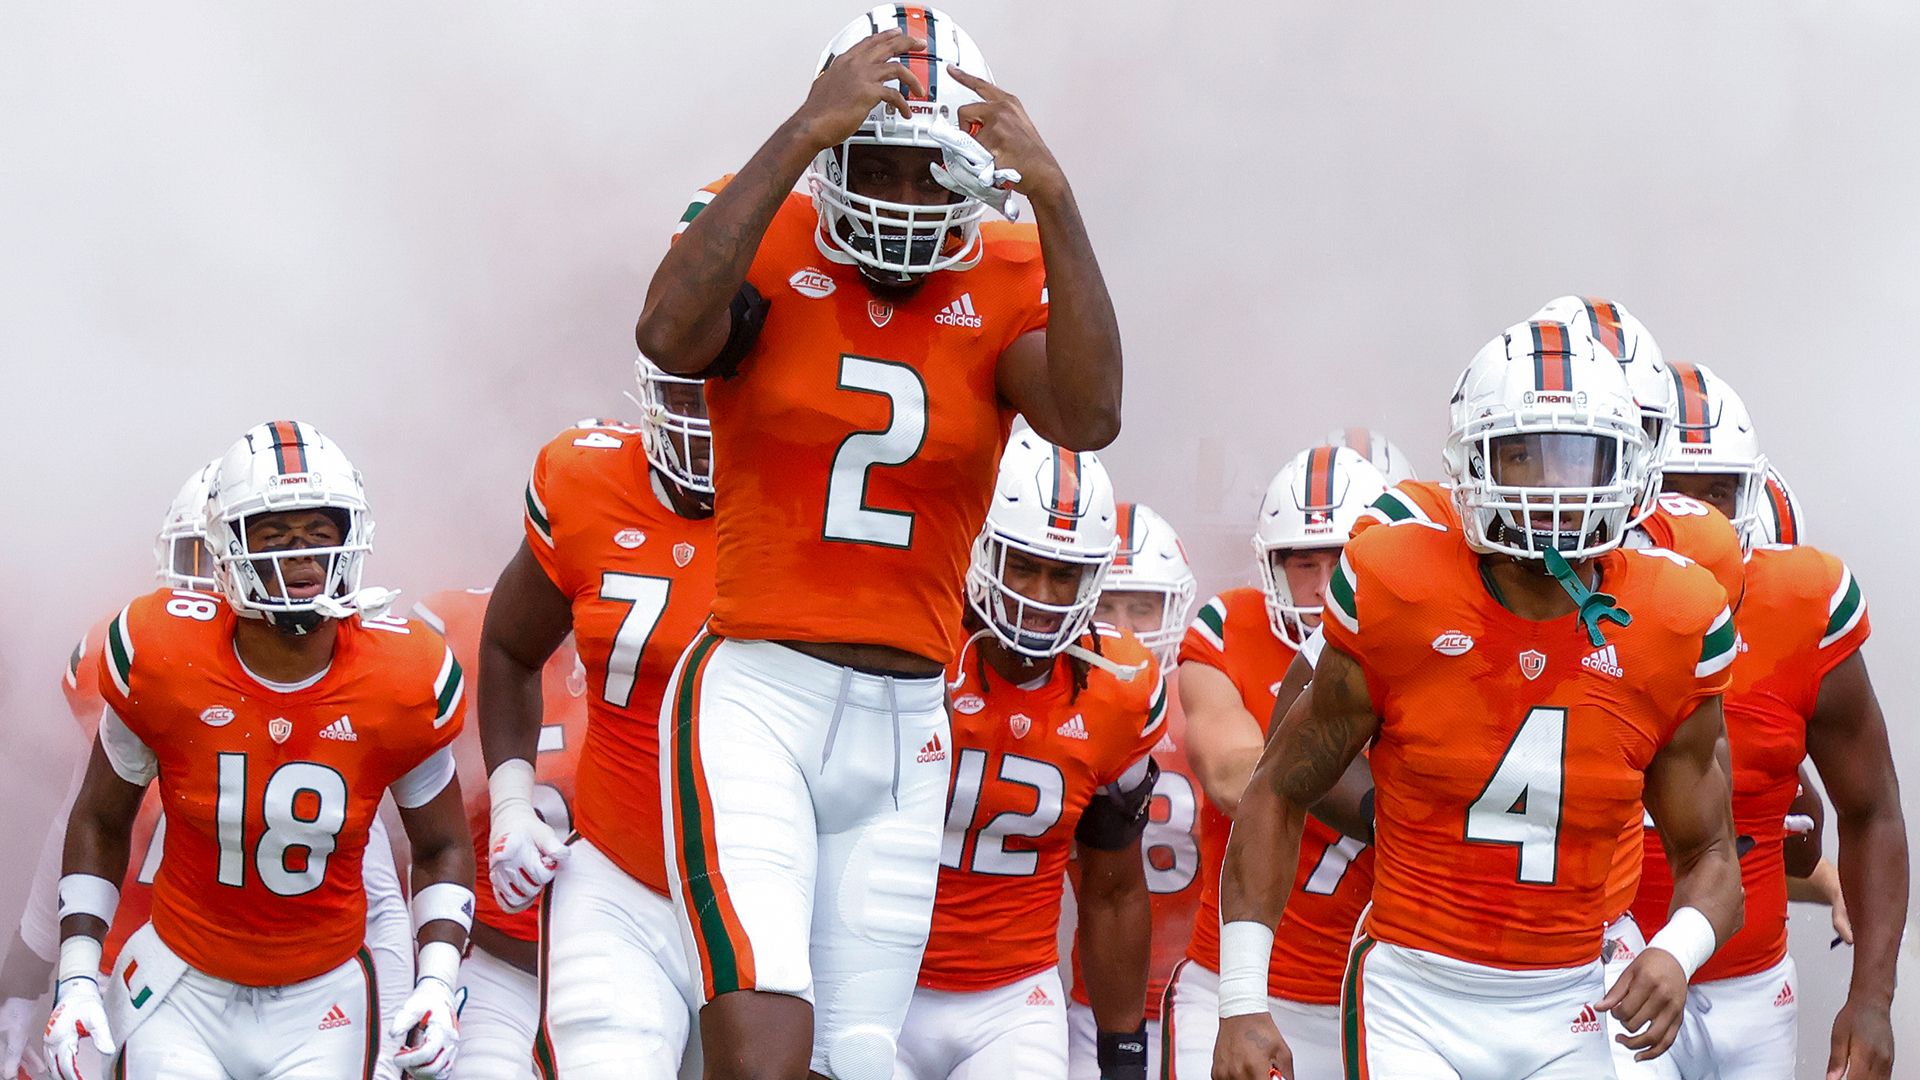 Canes Look to Give Seniors Memorable Home Finale